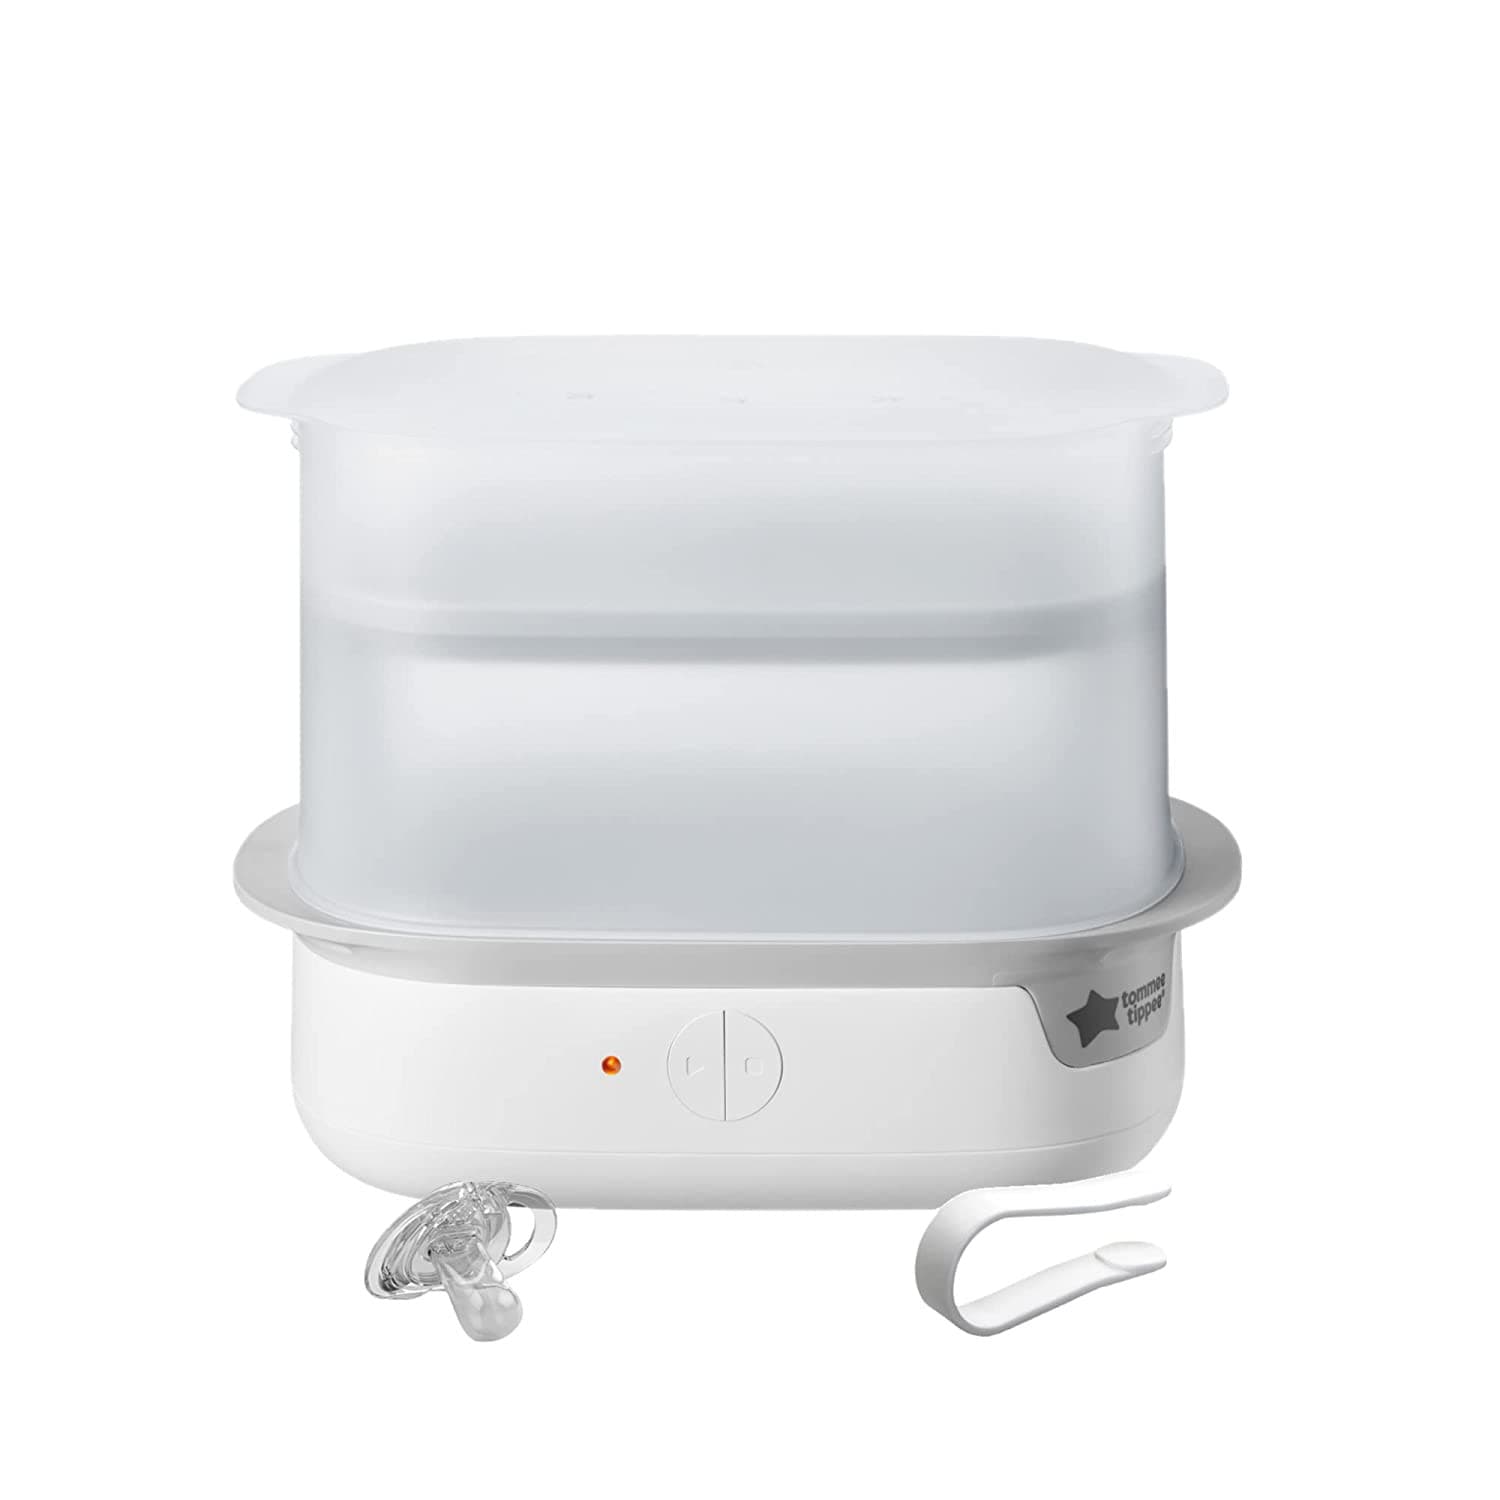 Tommee Tippee Closer to Nature Electric Steam Sterilizer White.